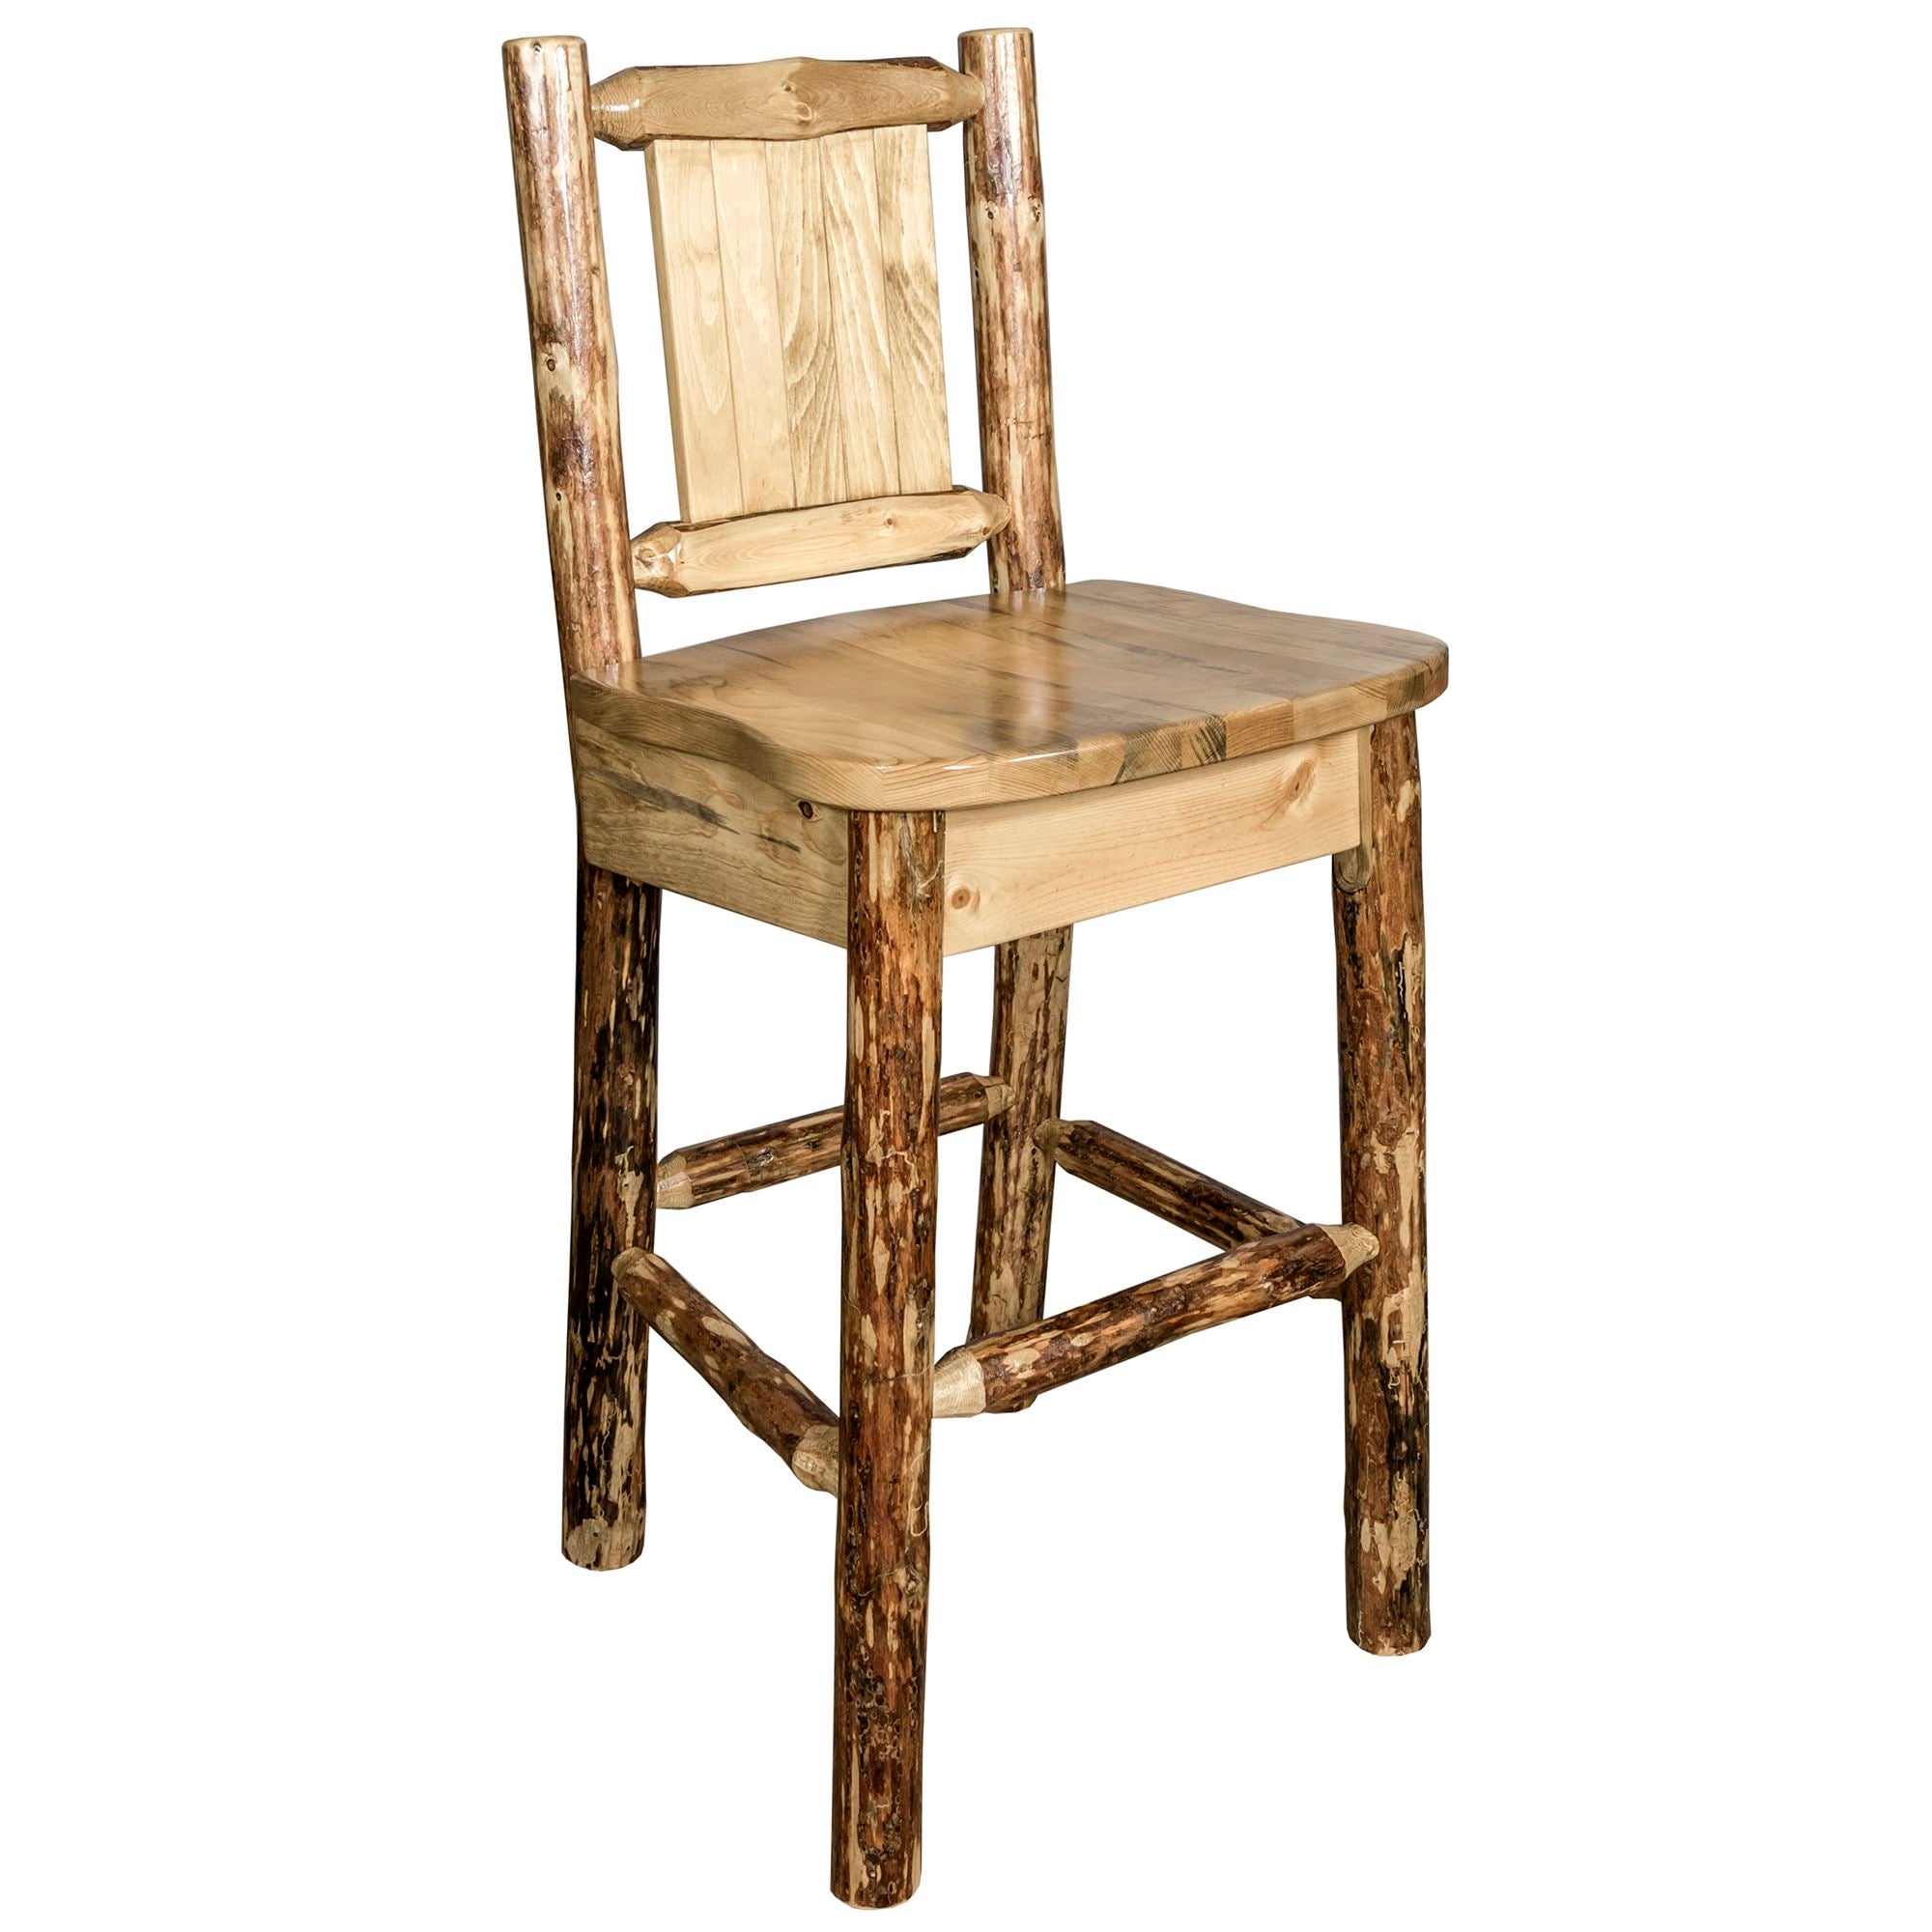 Montana Glacier Country Collection MWGCBSWNRLZ Barstool With Back and Laser Engraved Design